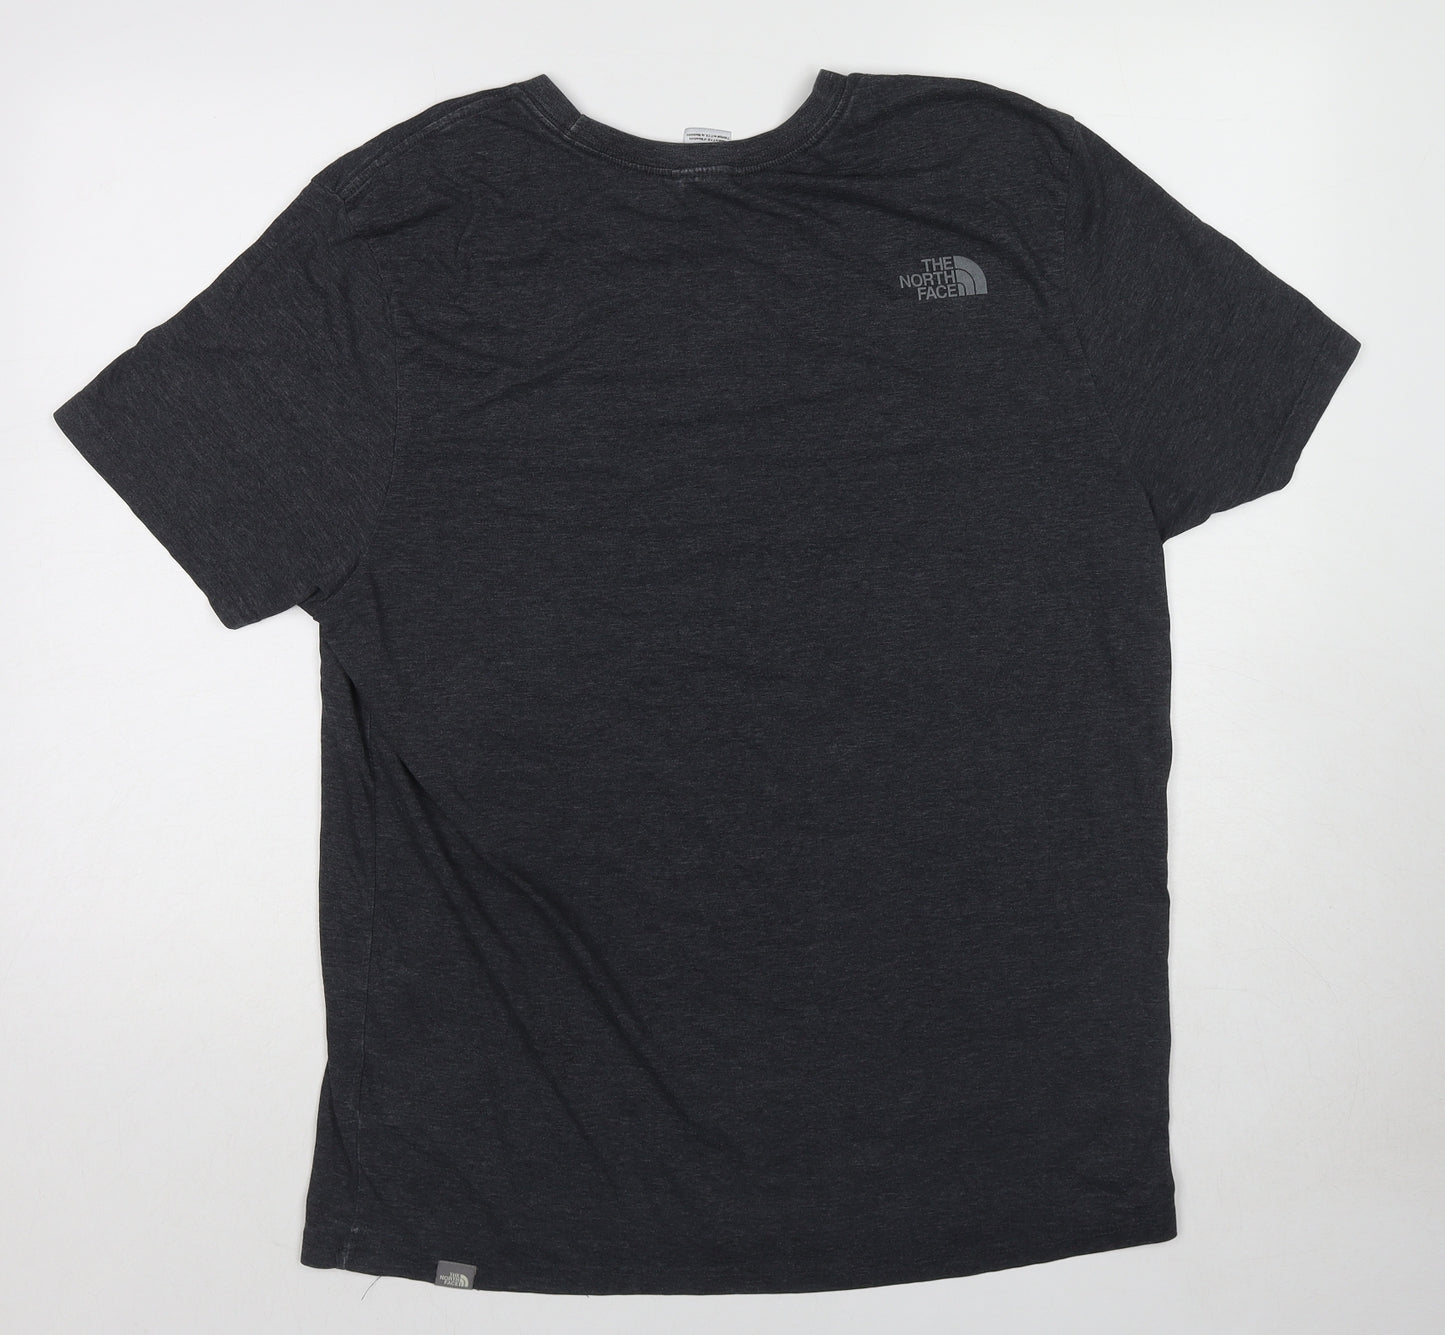 The North Face Mens Grey Cotton T-Shirt Size XL Round Neck